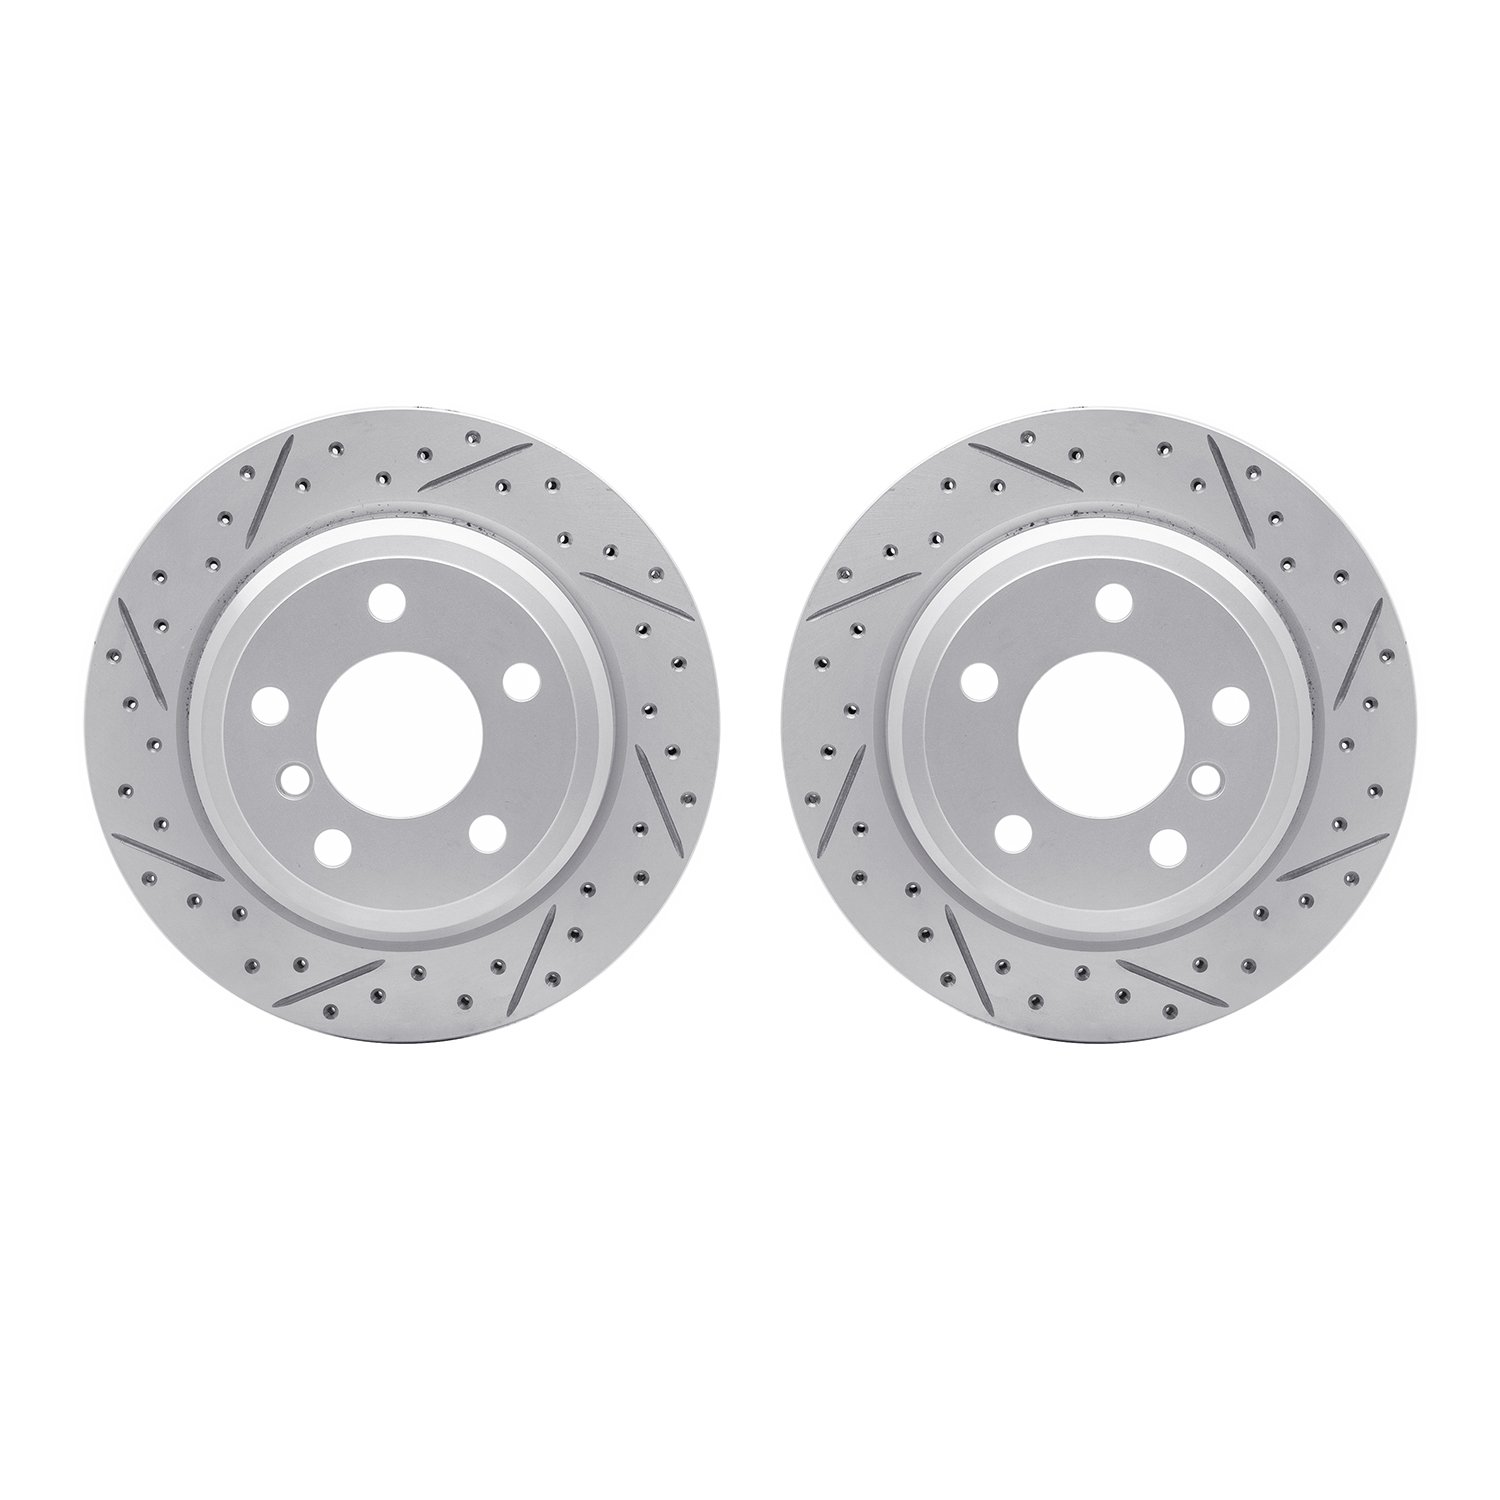 2002-31062 Geoperformance Drilled/Slotted Brake Rotors, 2013-2020 BMW, Position: Rear